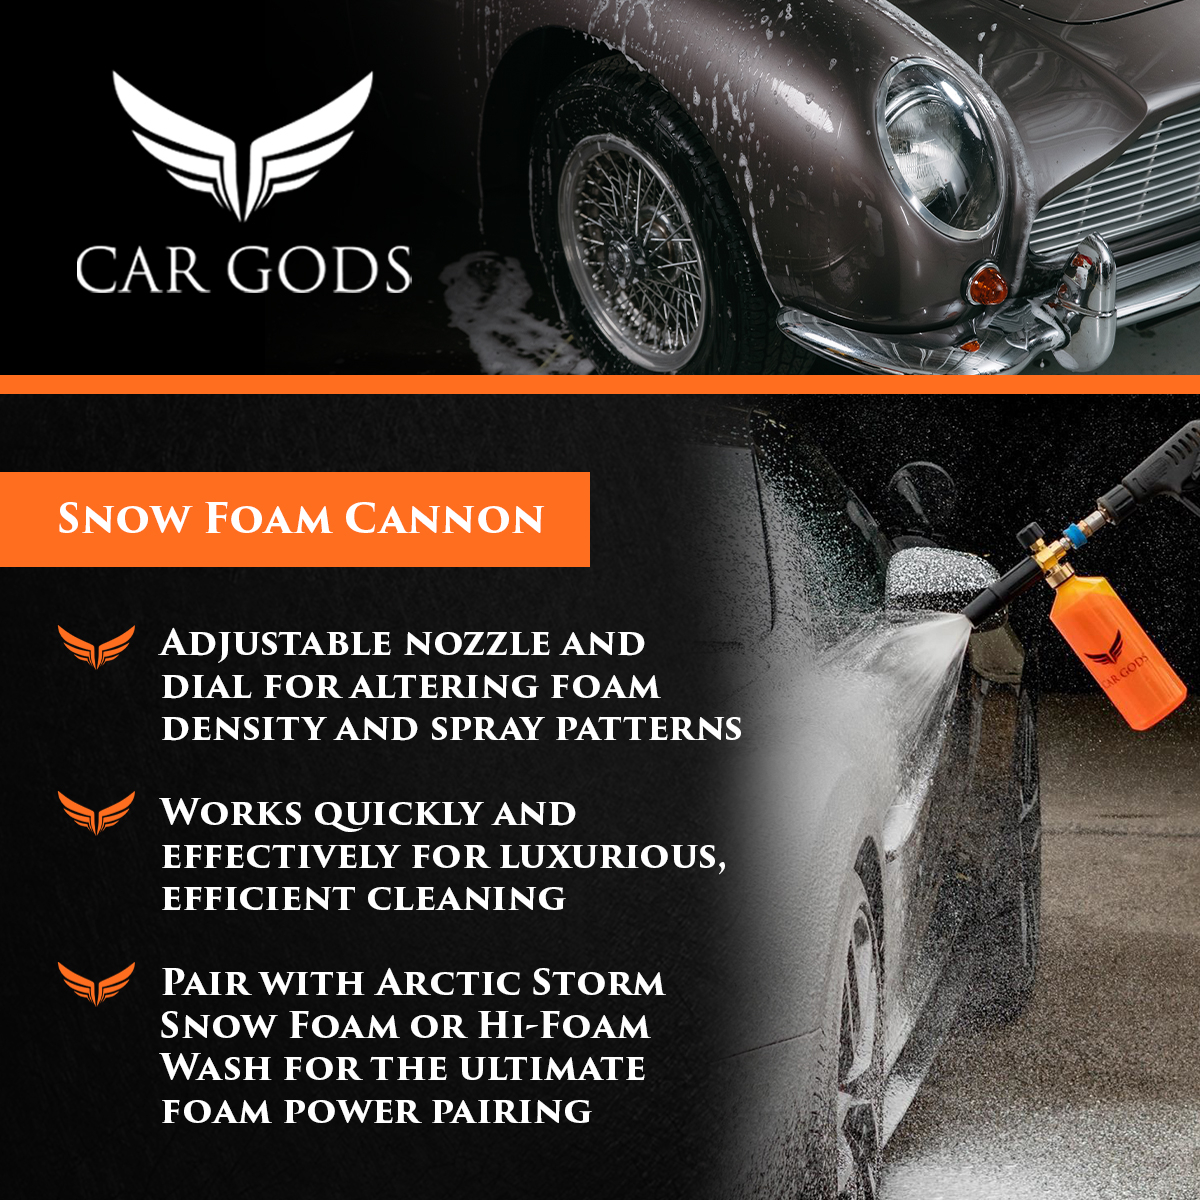 Car Gods Snow Foam Cannon. Key benefits: Adjustable nozzle and dial for altering foam density and spray patterns, Works quickly and effectively for luxurious, efficient cleaning, Pair with Arctic Storm Snow Foam or Hi-Foam Wash for the ultimate foam power pairing, Ready for use with branded pressure washers, including Karcher K Series (Adapter included).